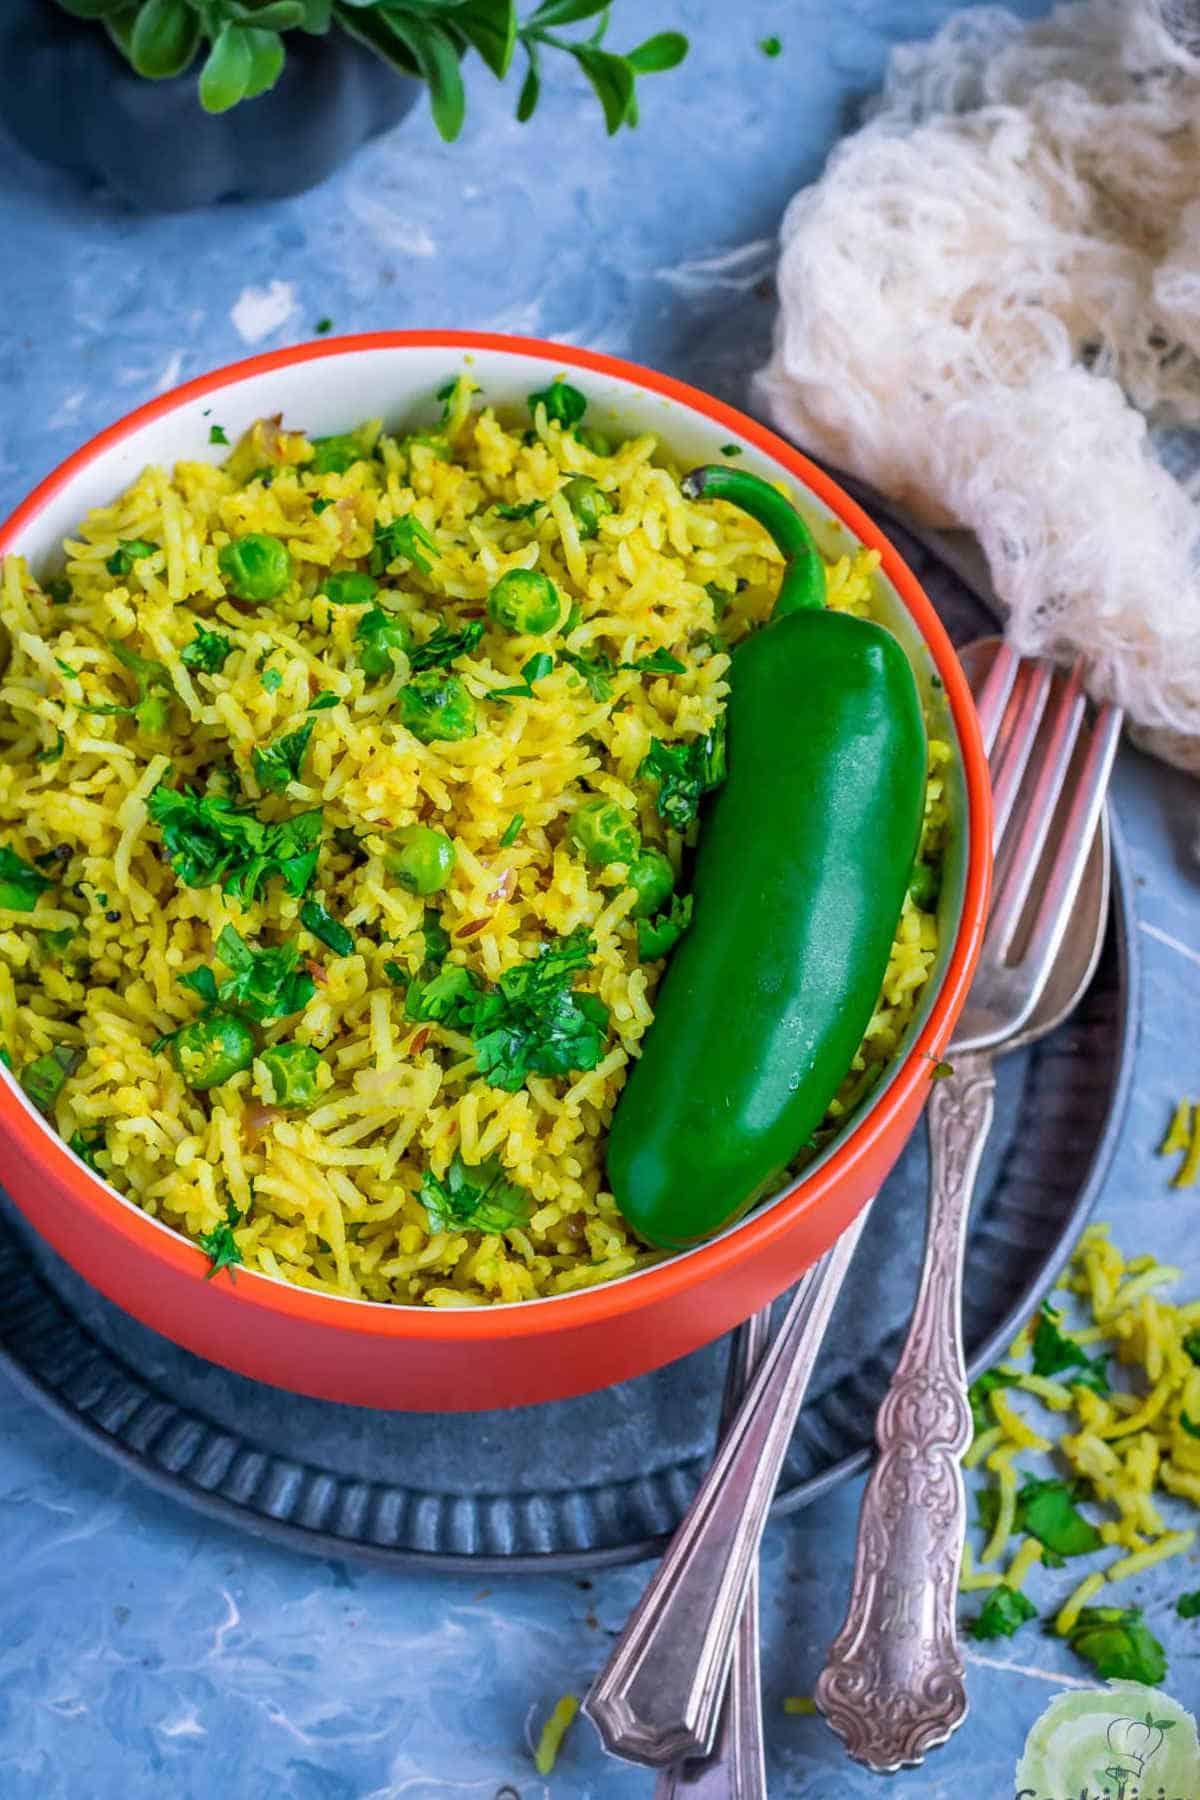 Green peas pulao in a red bowl with a green chili on top.